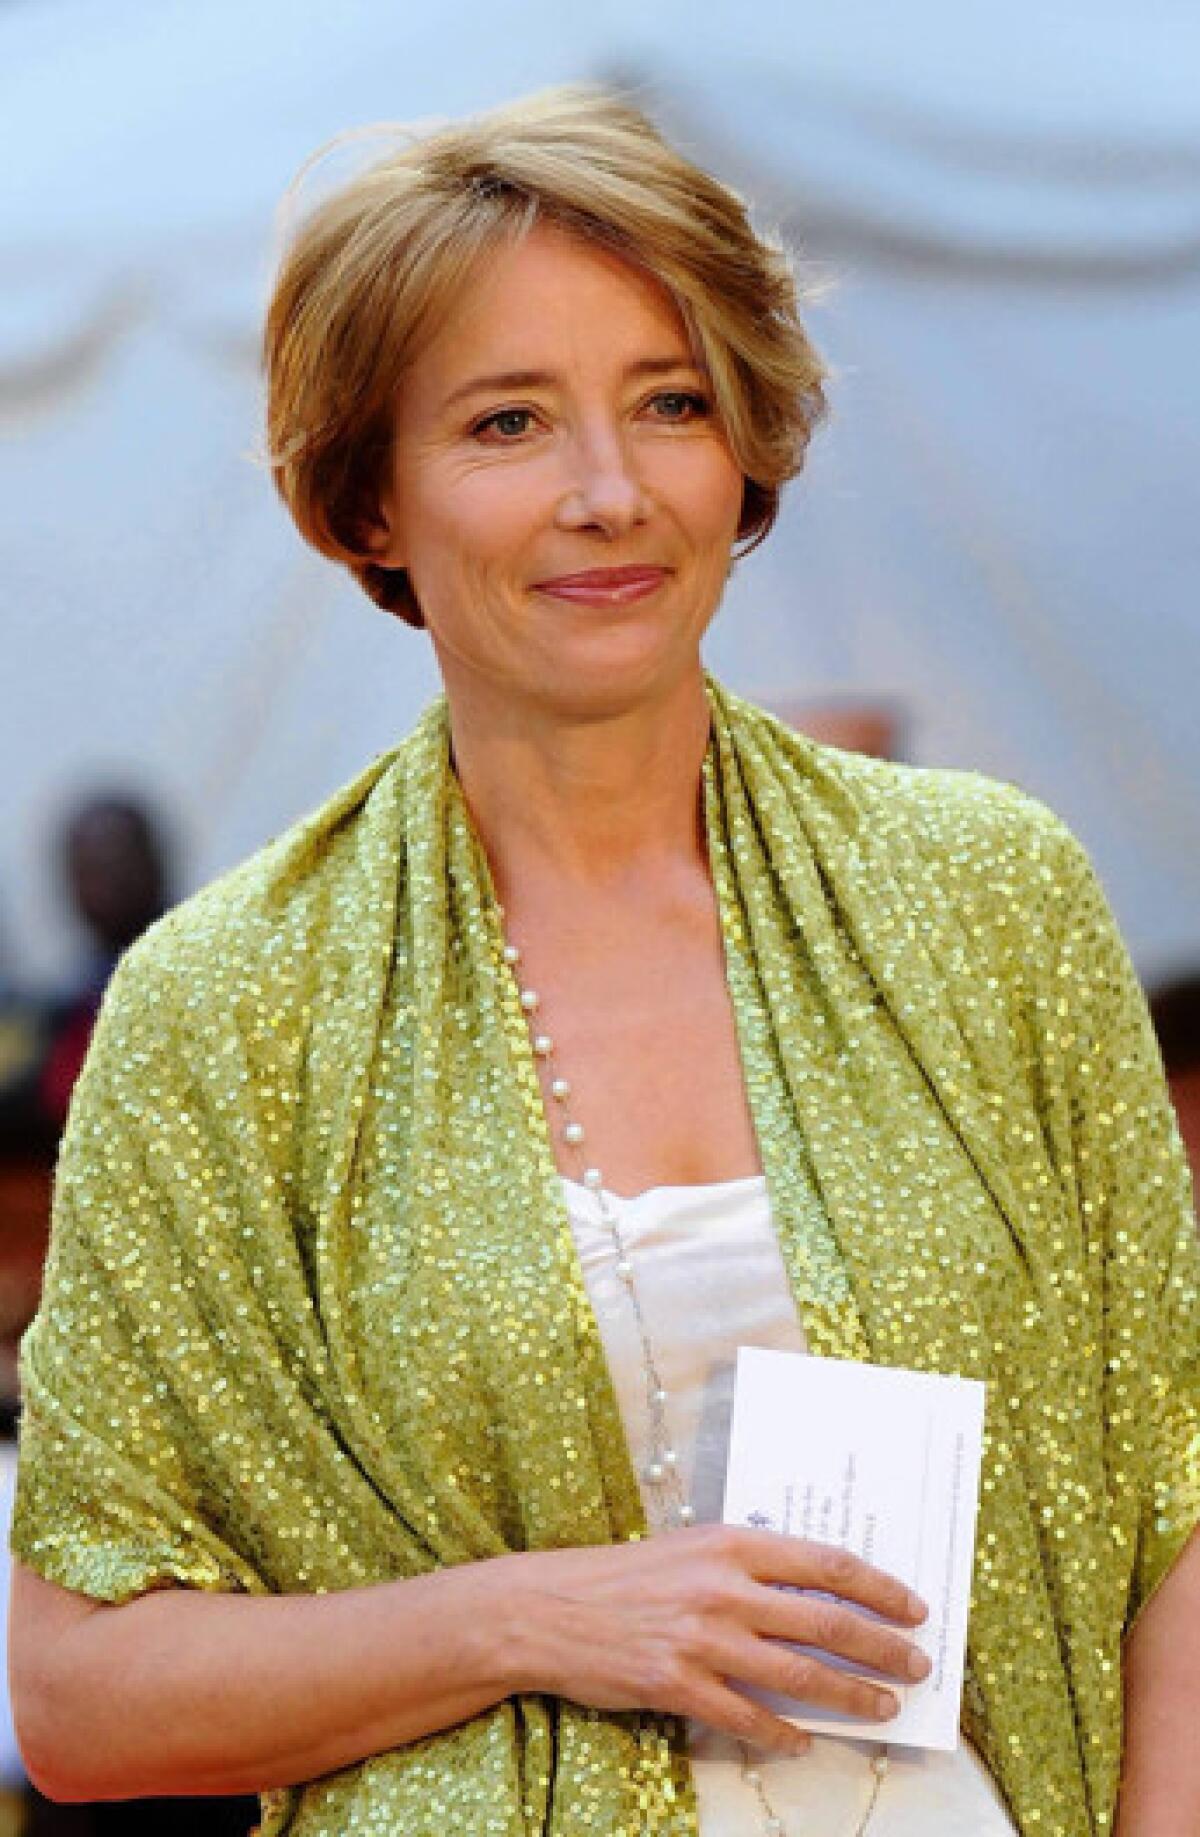 Emma Thompson's "The Further Tale of Peter Rabbit," to be released in September, will celebrate the 110-year anniversary of the Beatrix Potter classic.